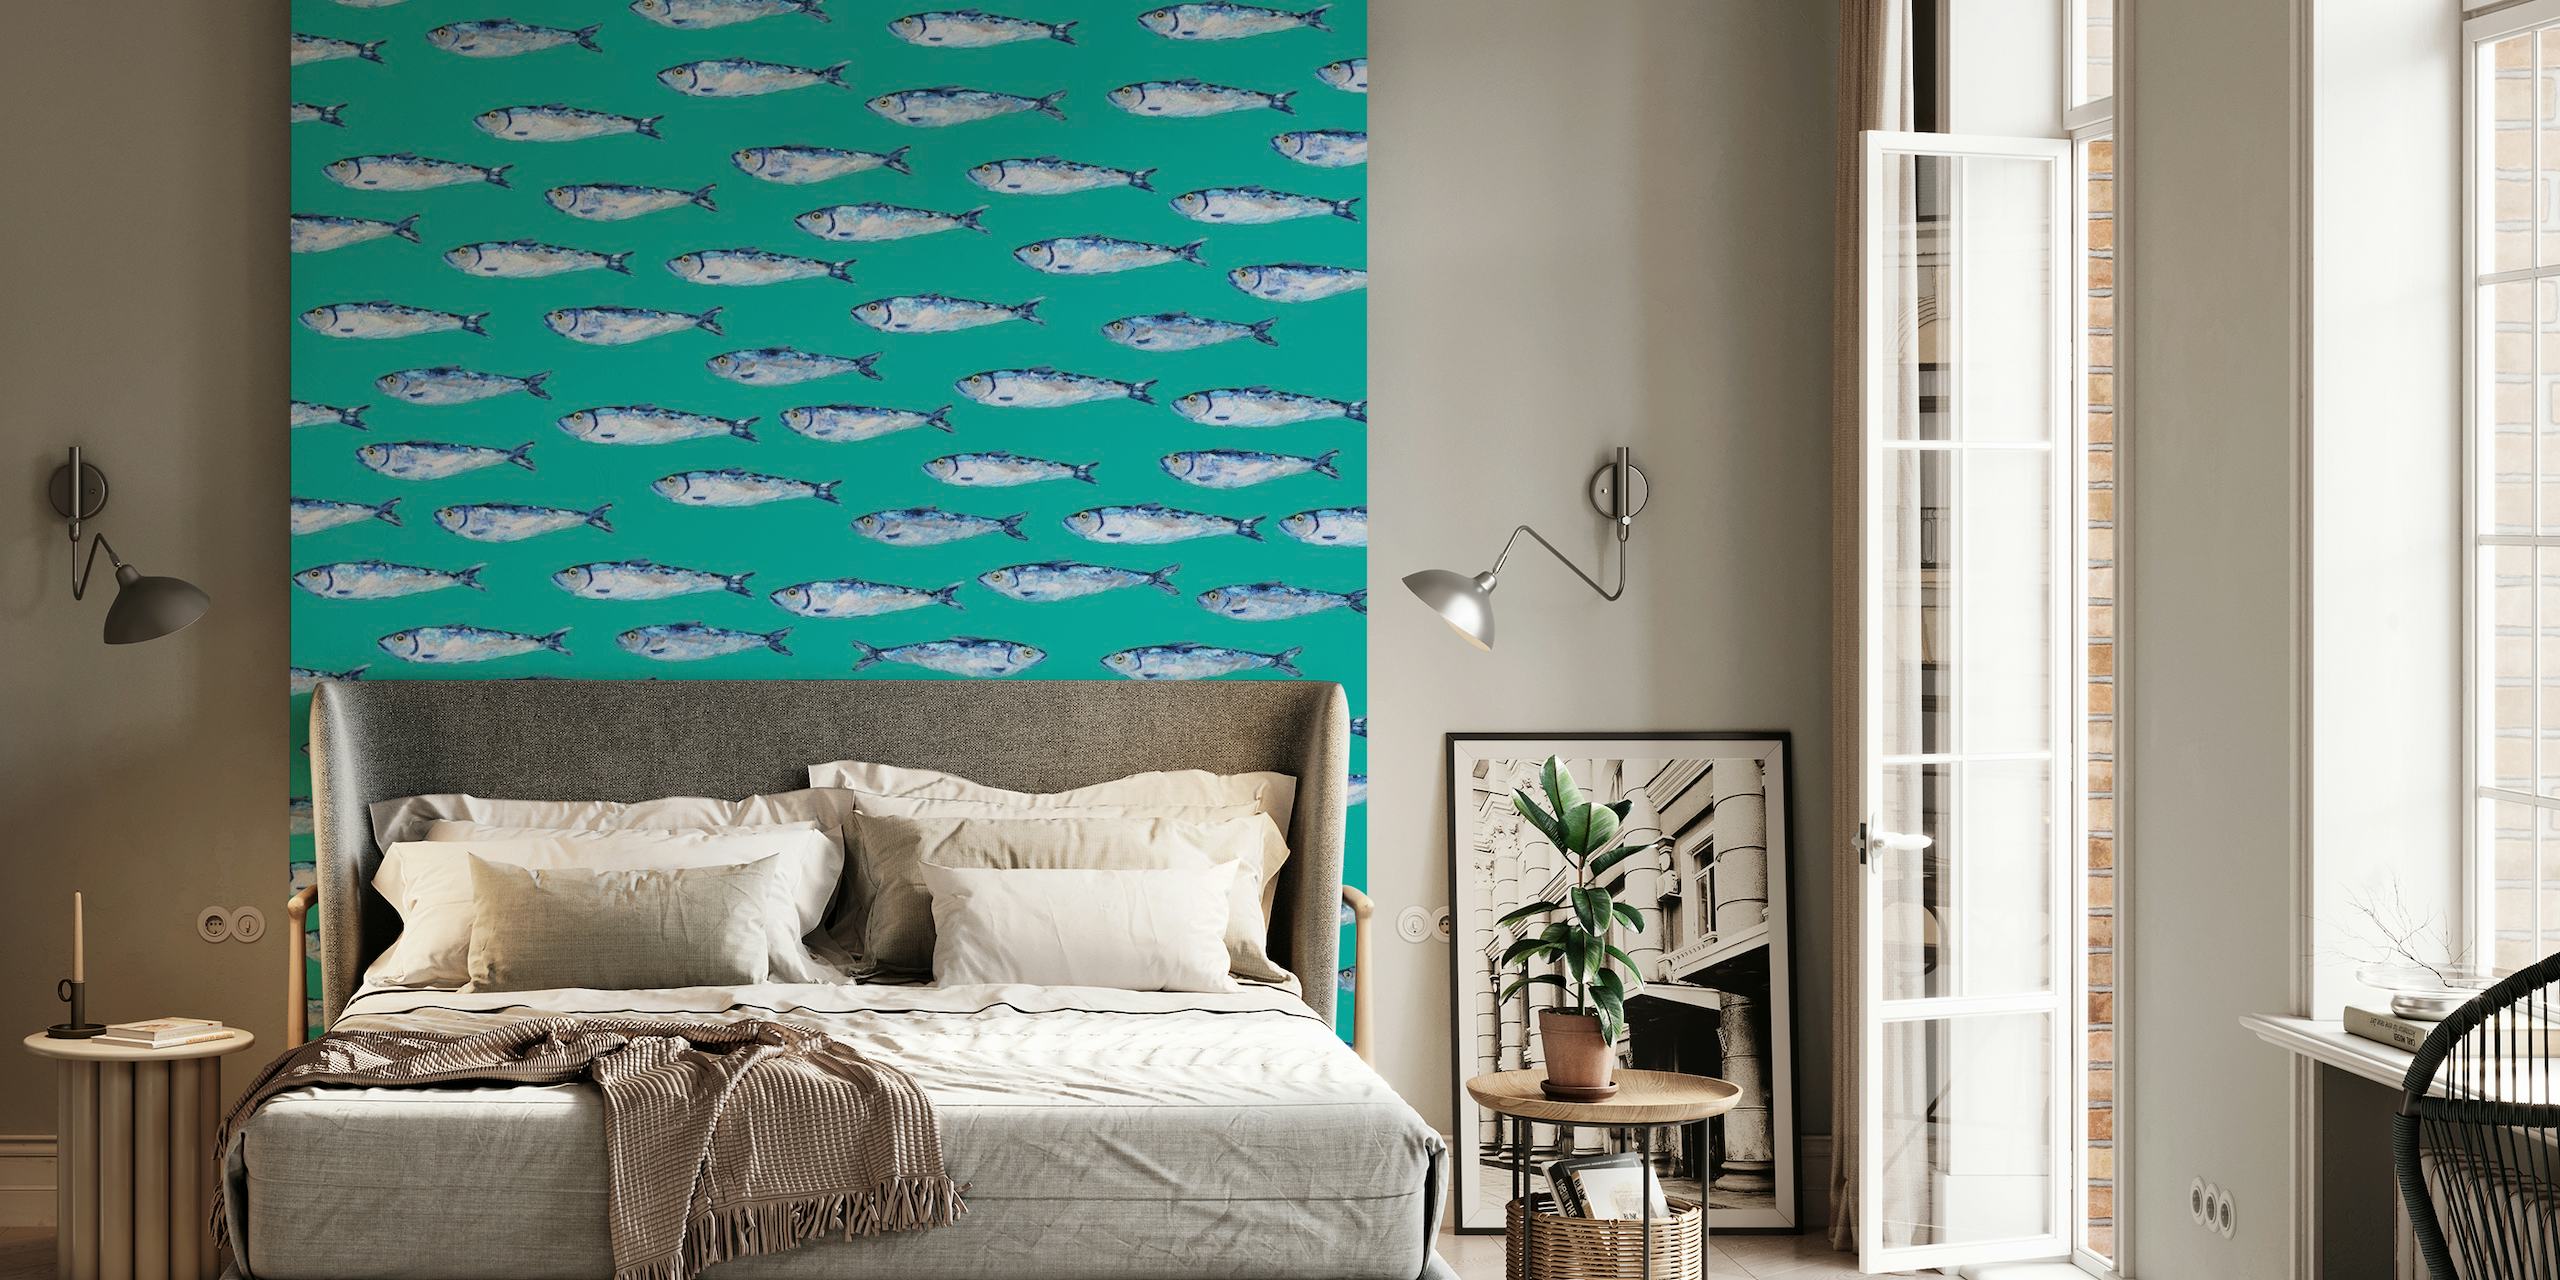 Silver sardines pattern on a teal background wall mural